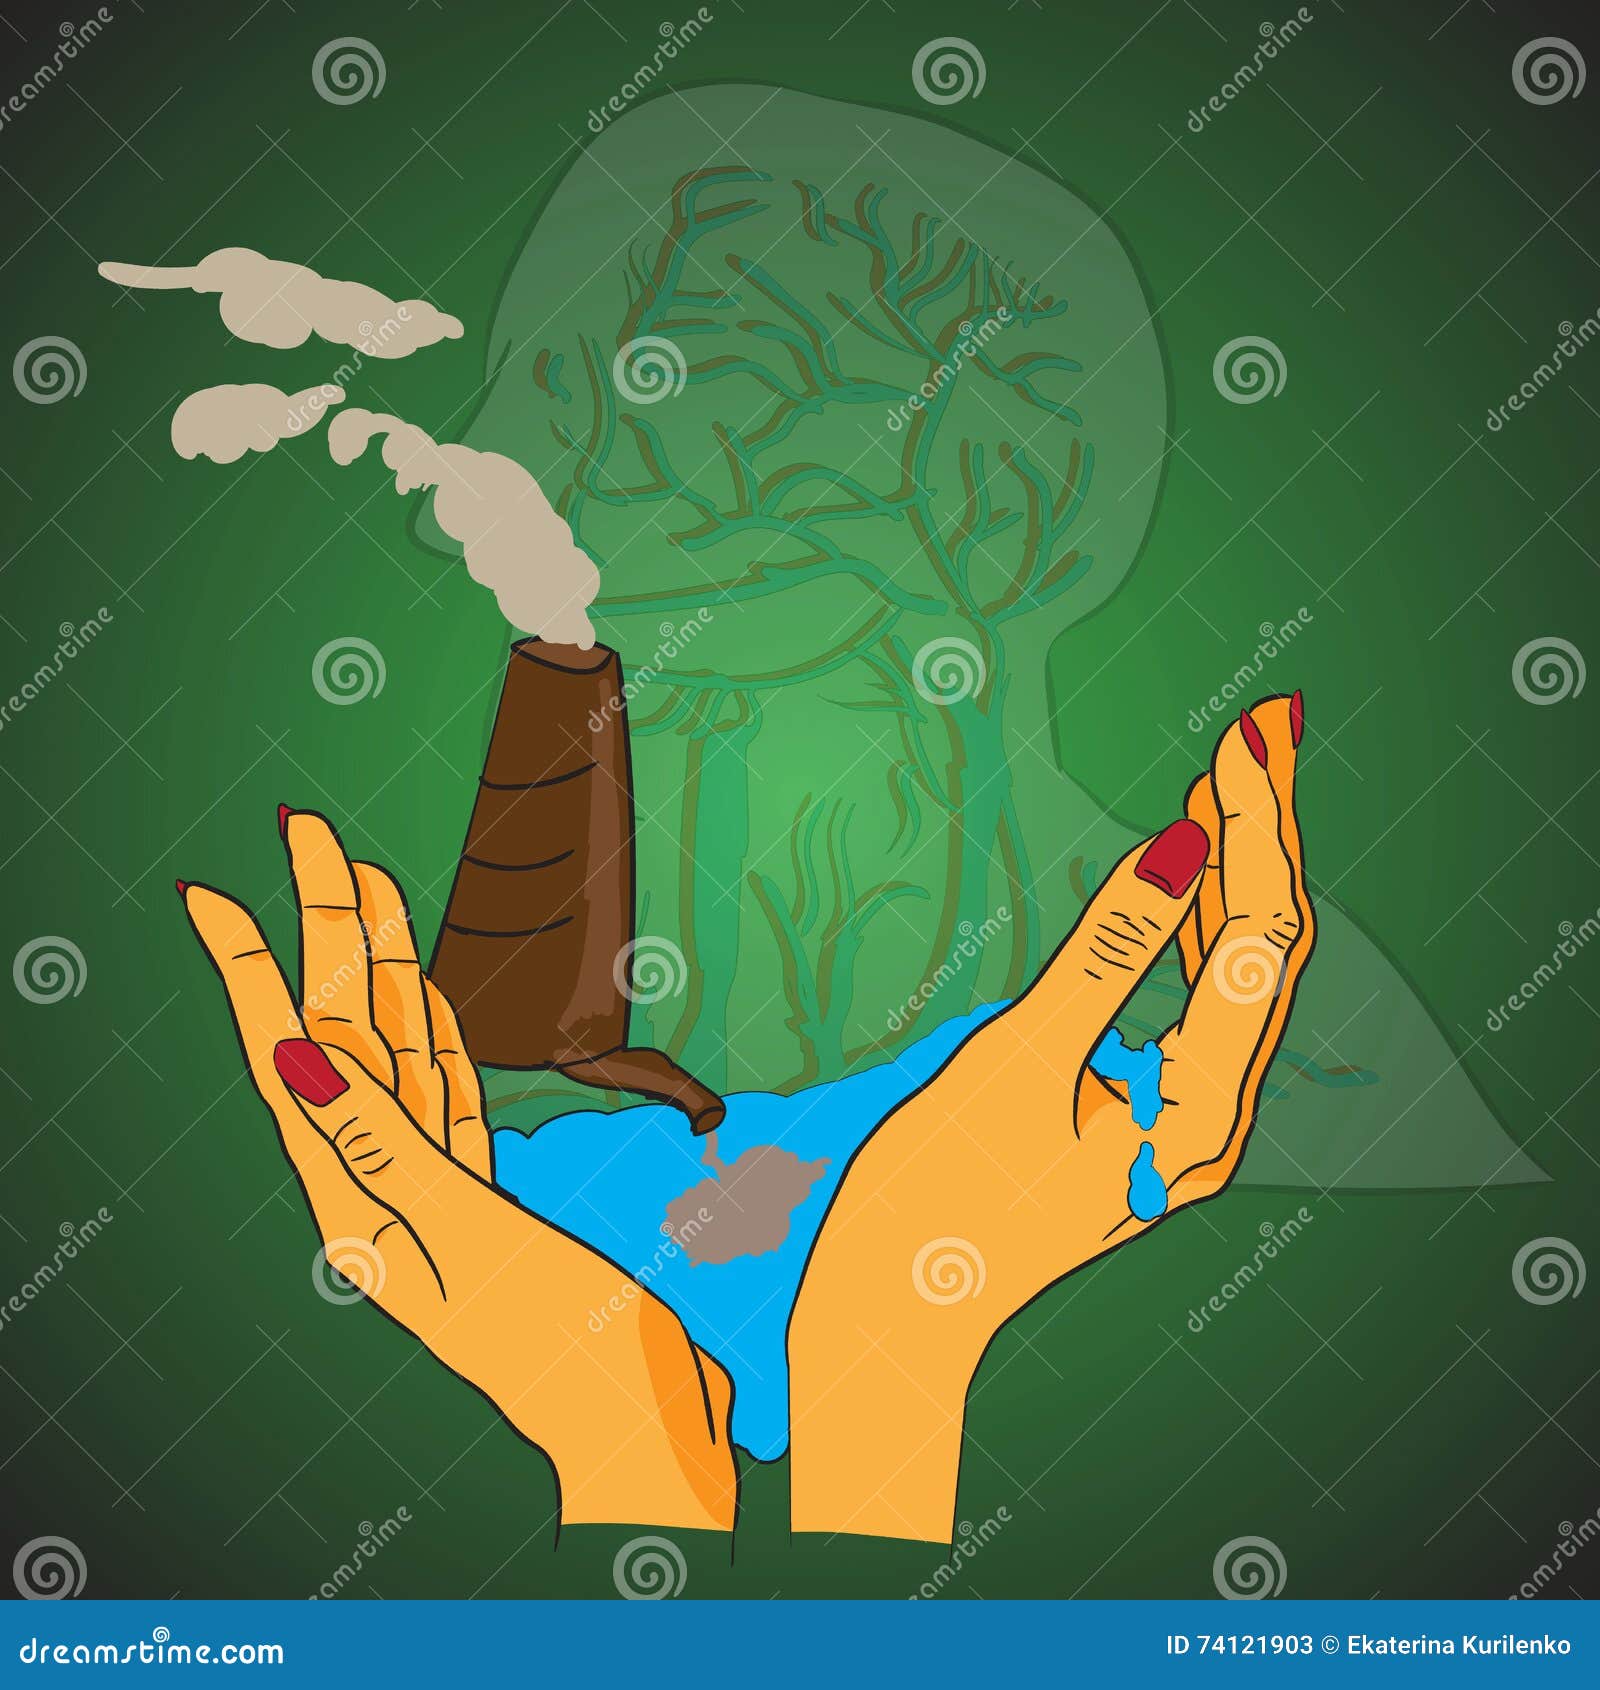 Water pollution stock vector. Illustration of health - 74121903